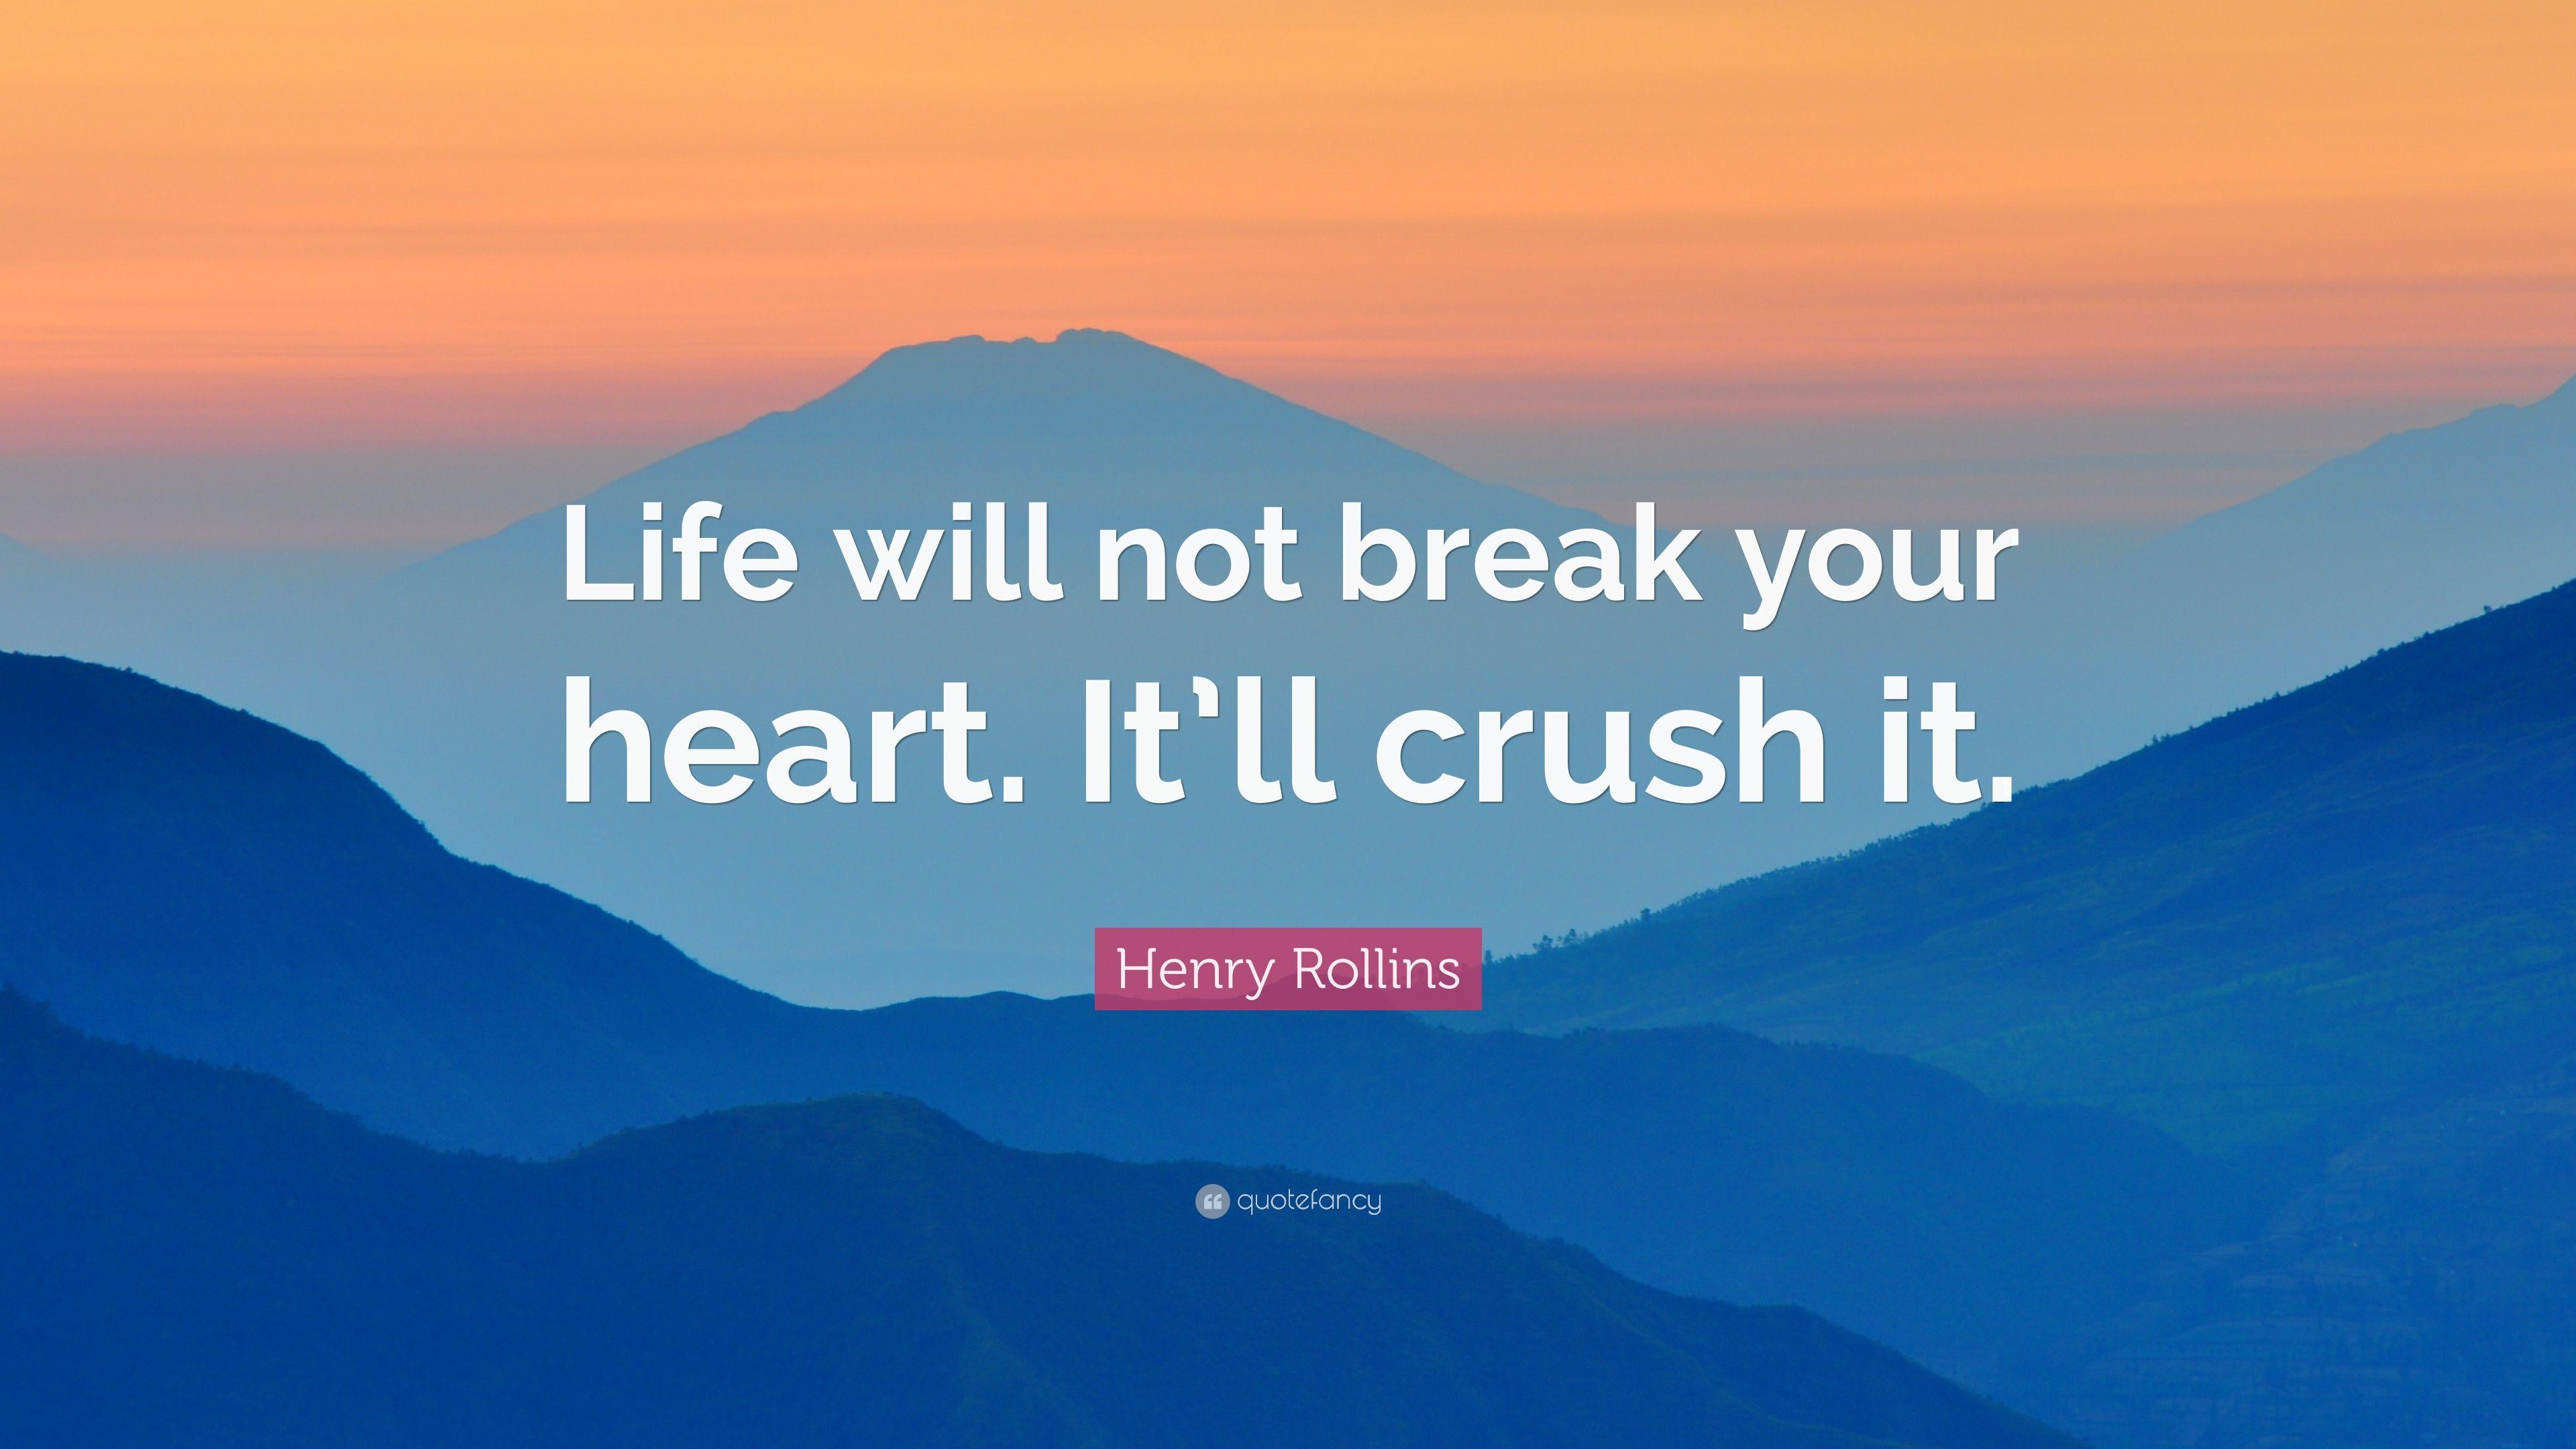 Henry Rollins Quote: “Life will not break your heart. It'll crush